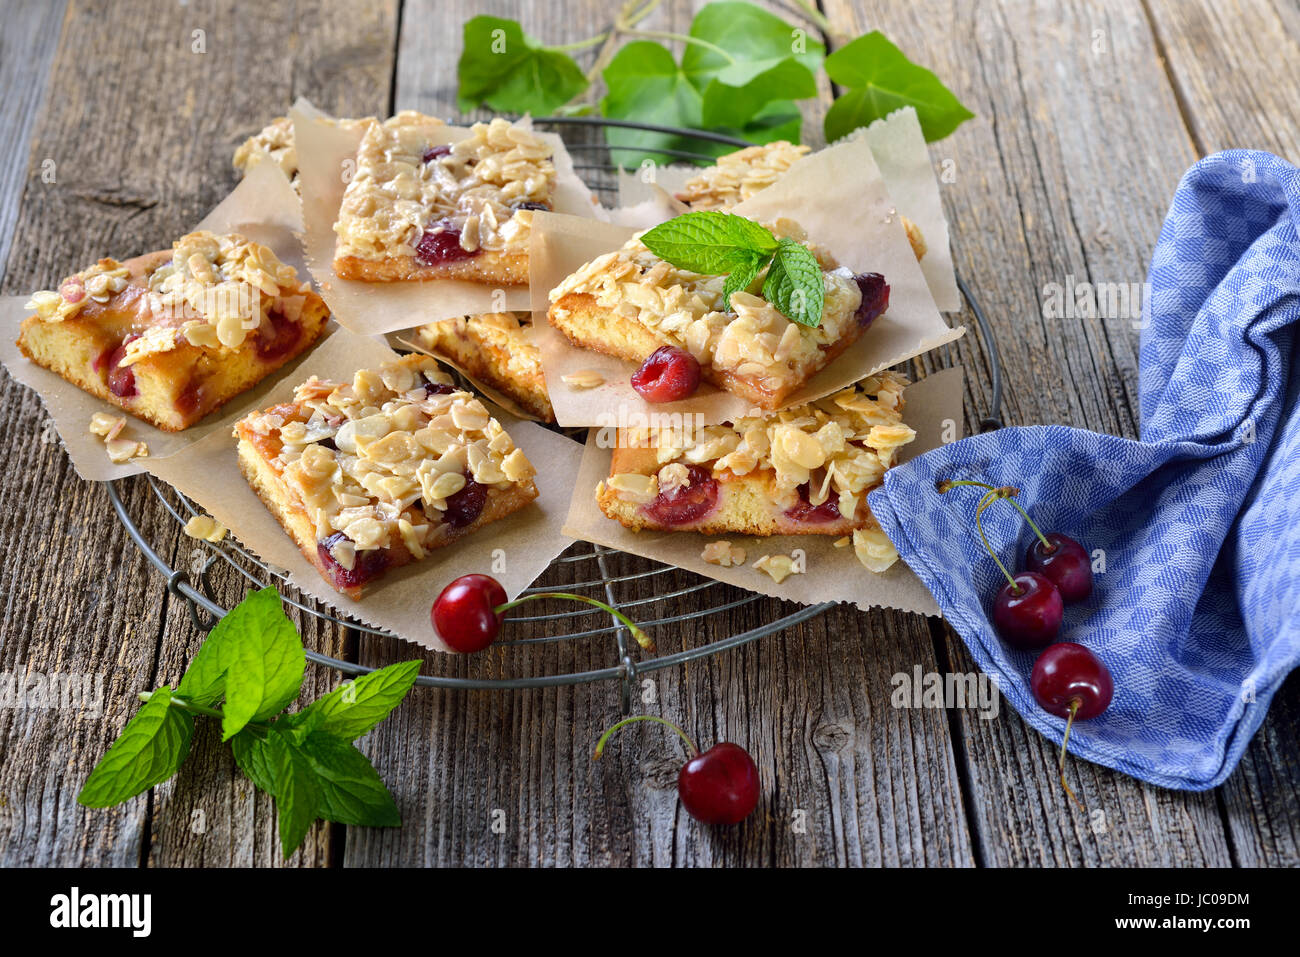 Fresh Austrian yeast cake with cherries and crunchy almond caramel served on a shabby cooling rack Stock Photo